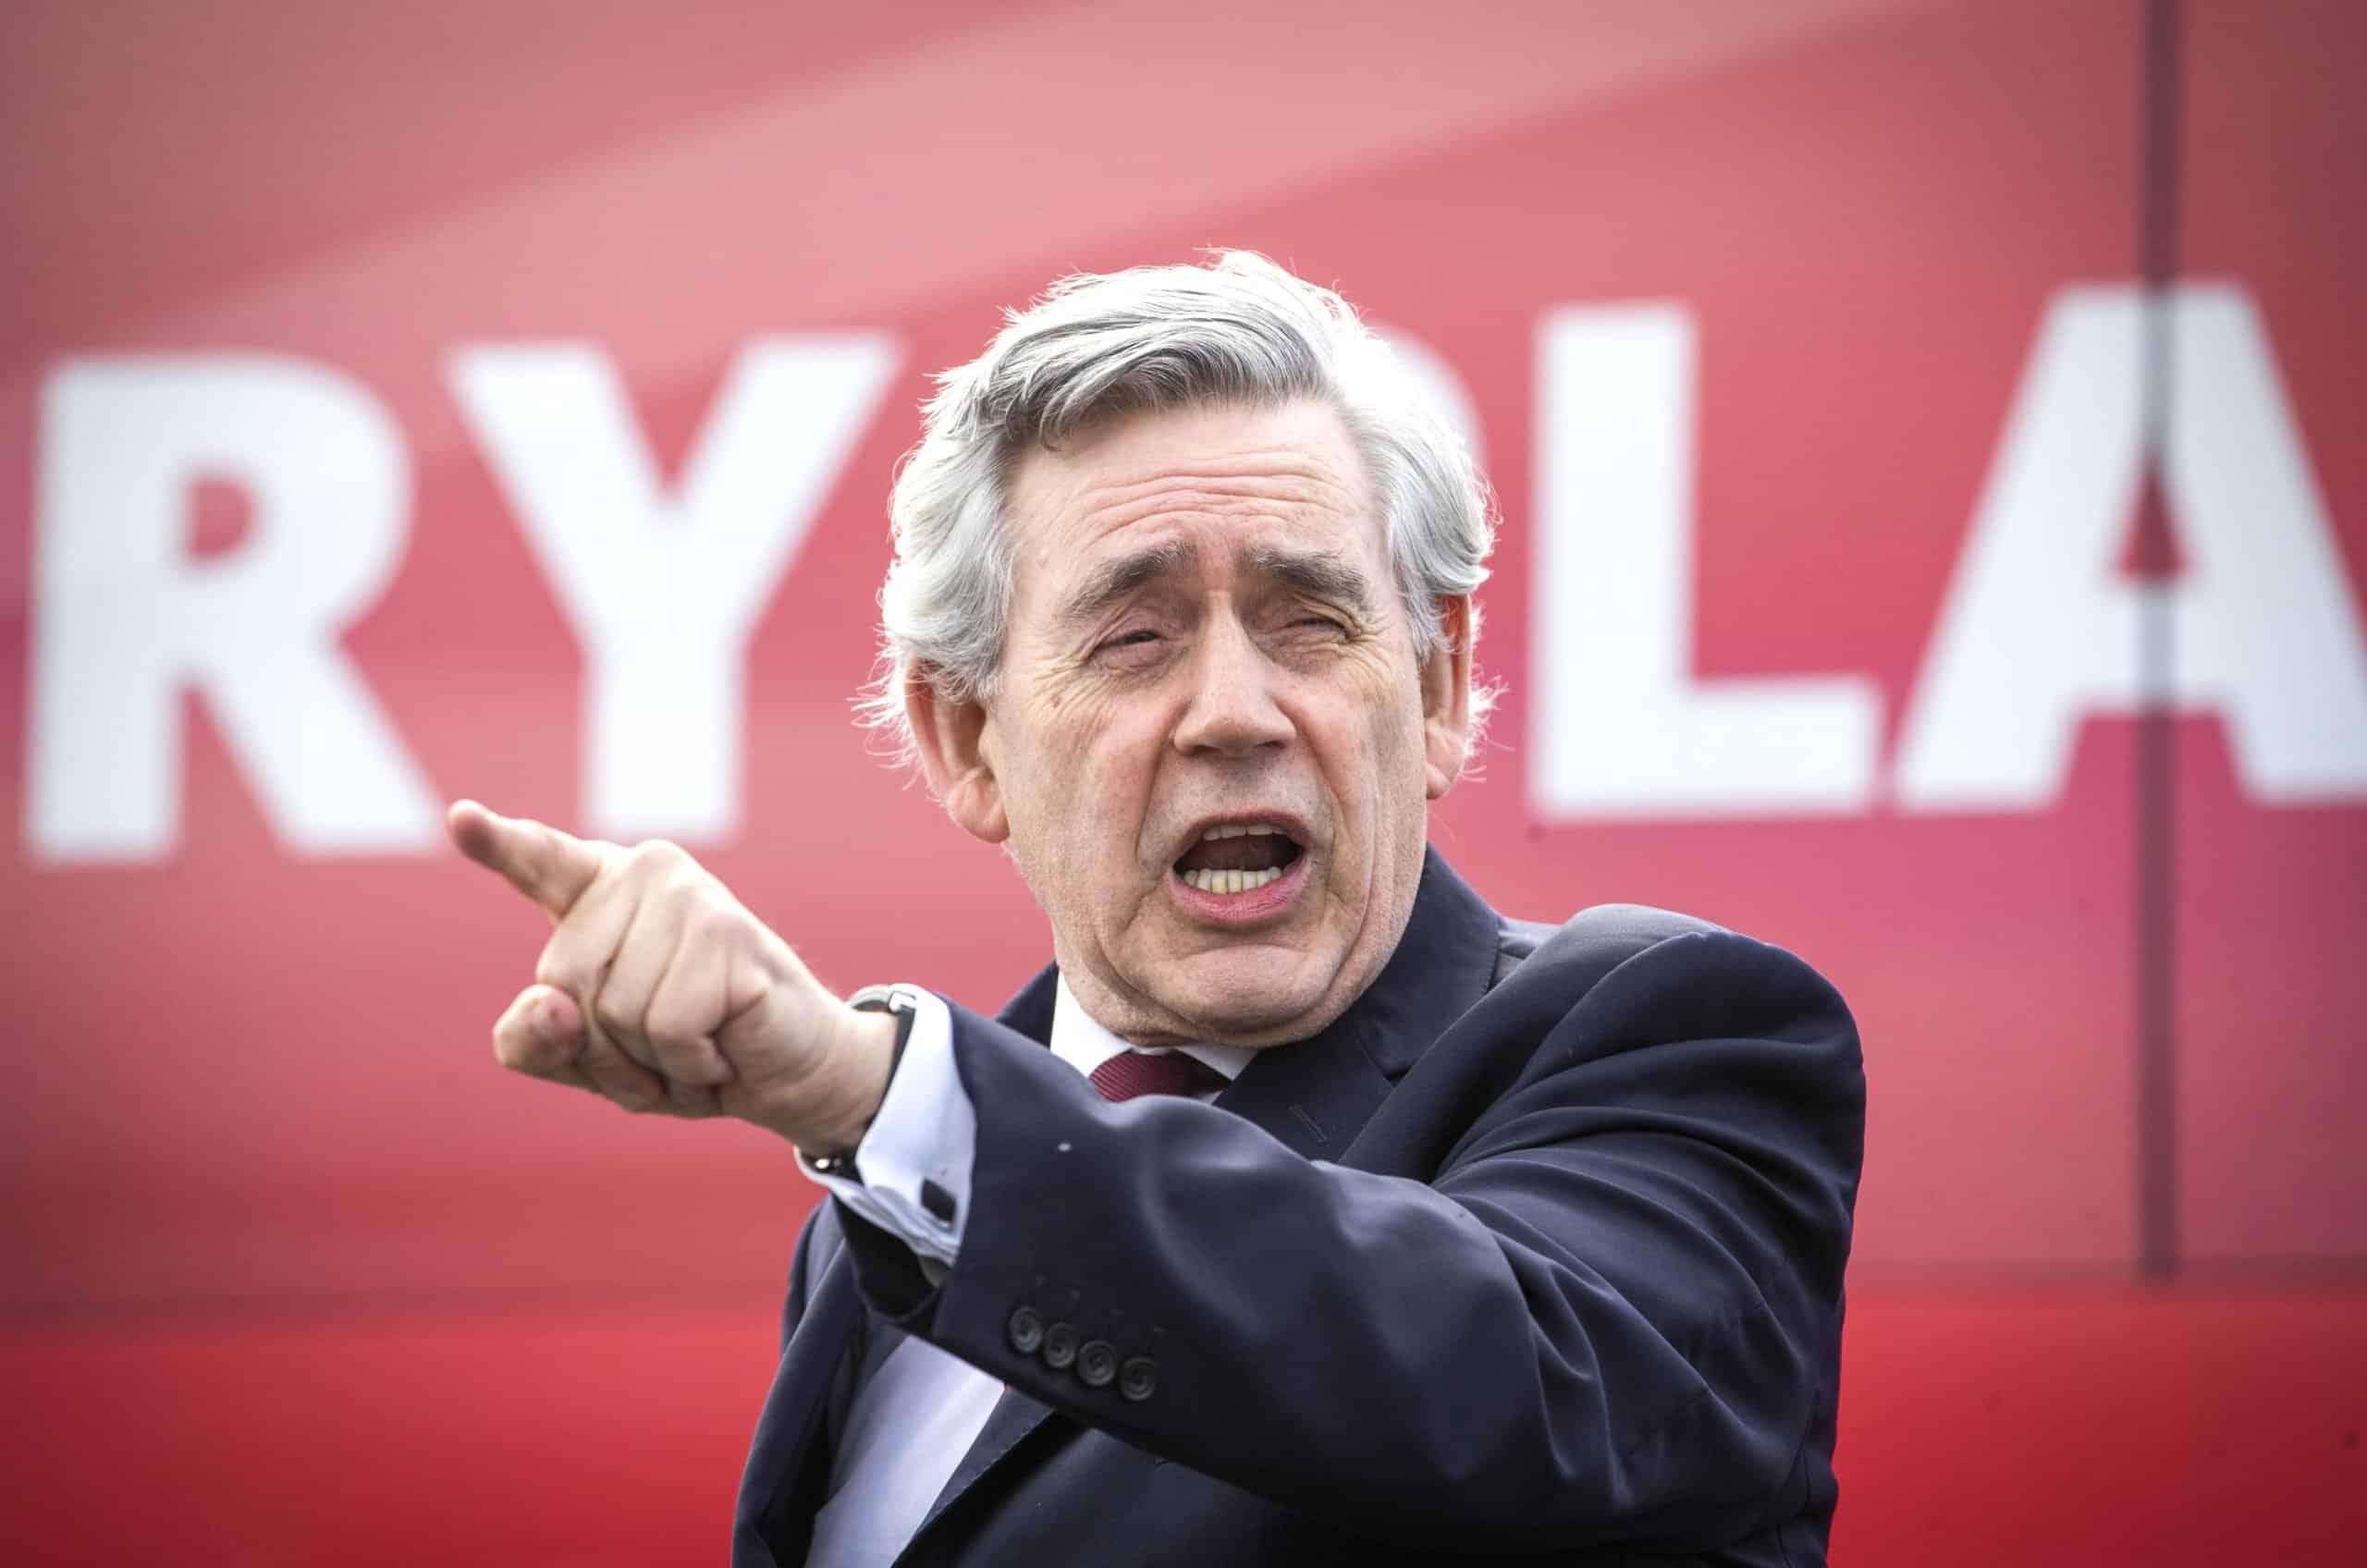 Gordon Brown: ‘This will be end of the NHS if the Tories have their way’